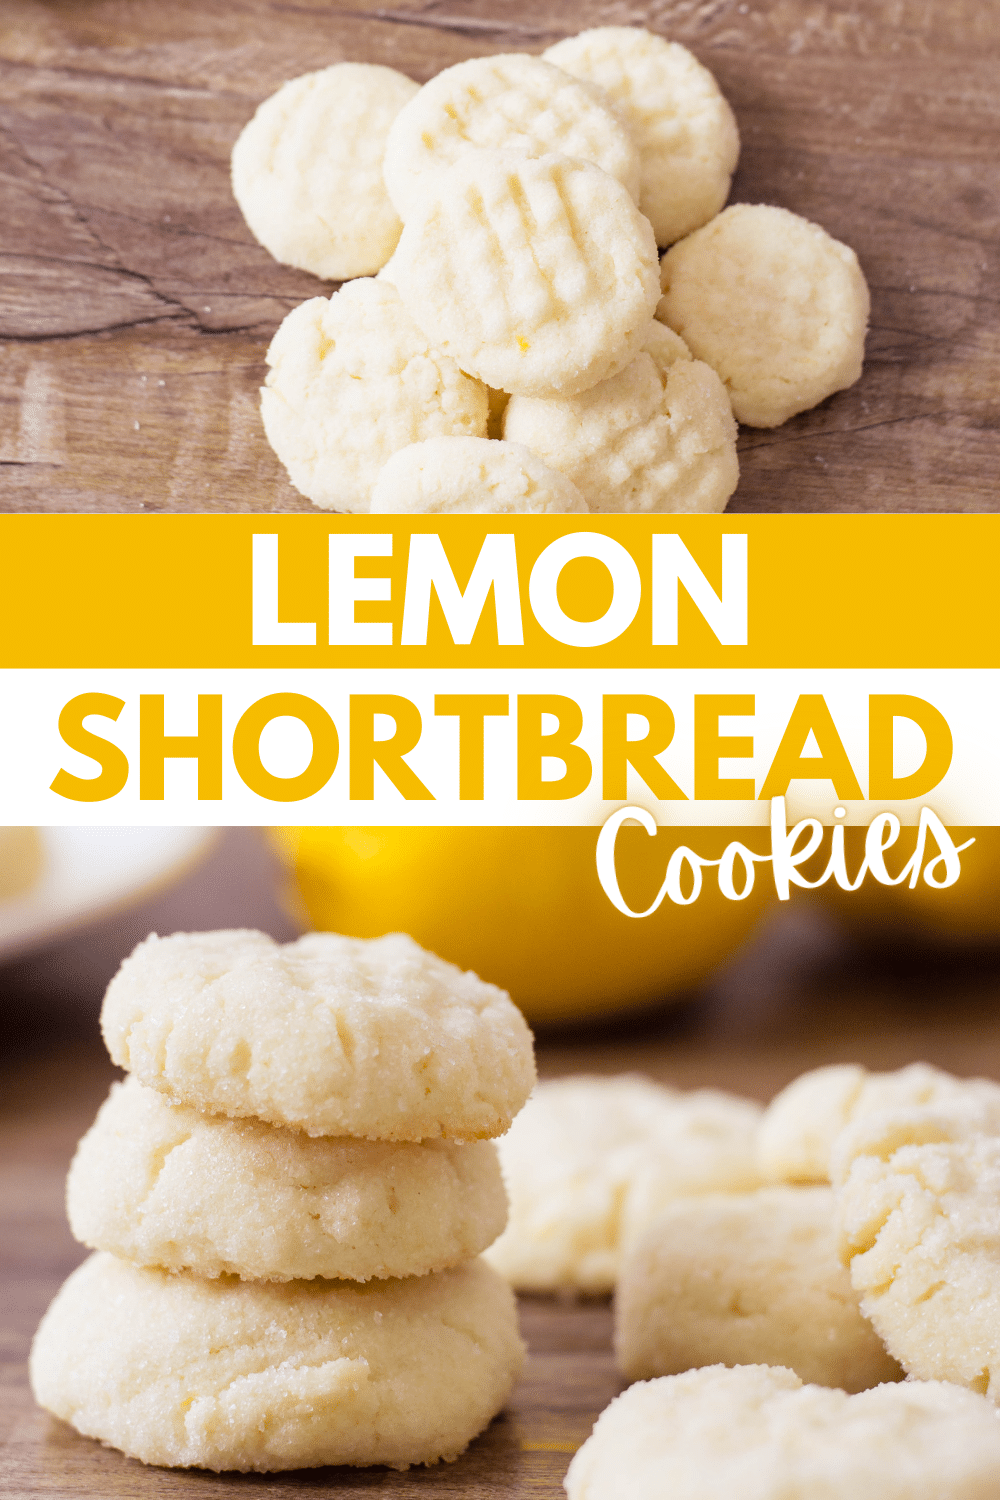 These Lemon Shortbread Cookies are a delightfully sweet treat. The buttery cookie dough is flavored with a hint of lemon with sugar. on top. #lemonshortbreadcookies #lemonshortbreadcookierecipe #cookierecipe #shortbreadcookiesrecipes #lemonflavor via @wondermomwannab